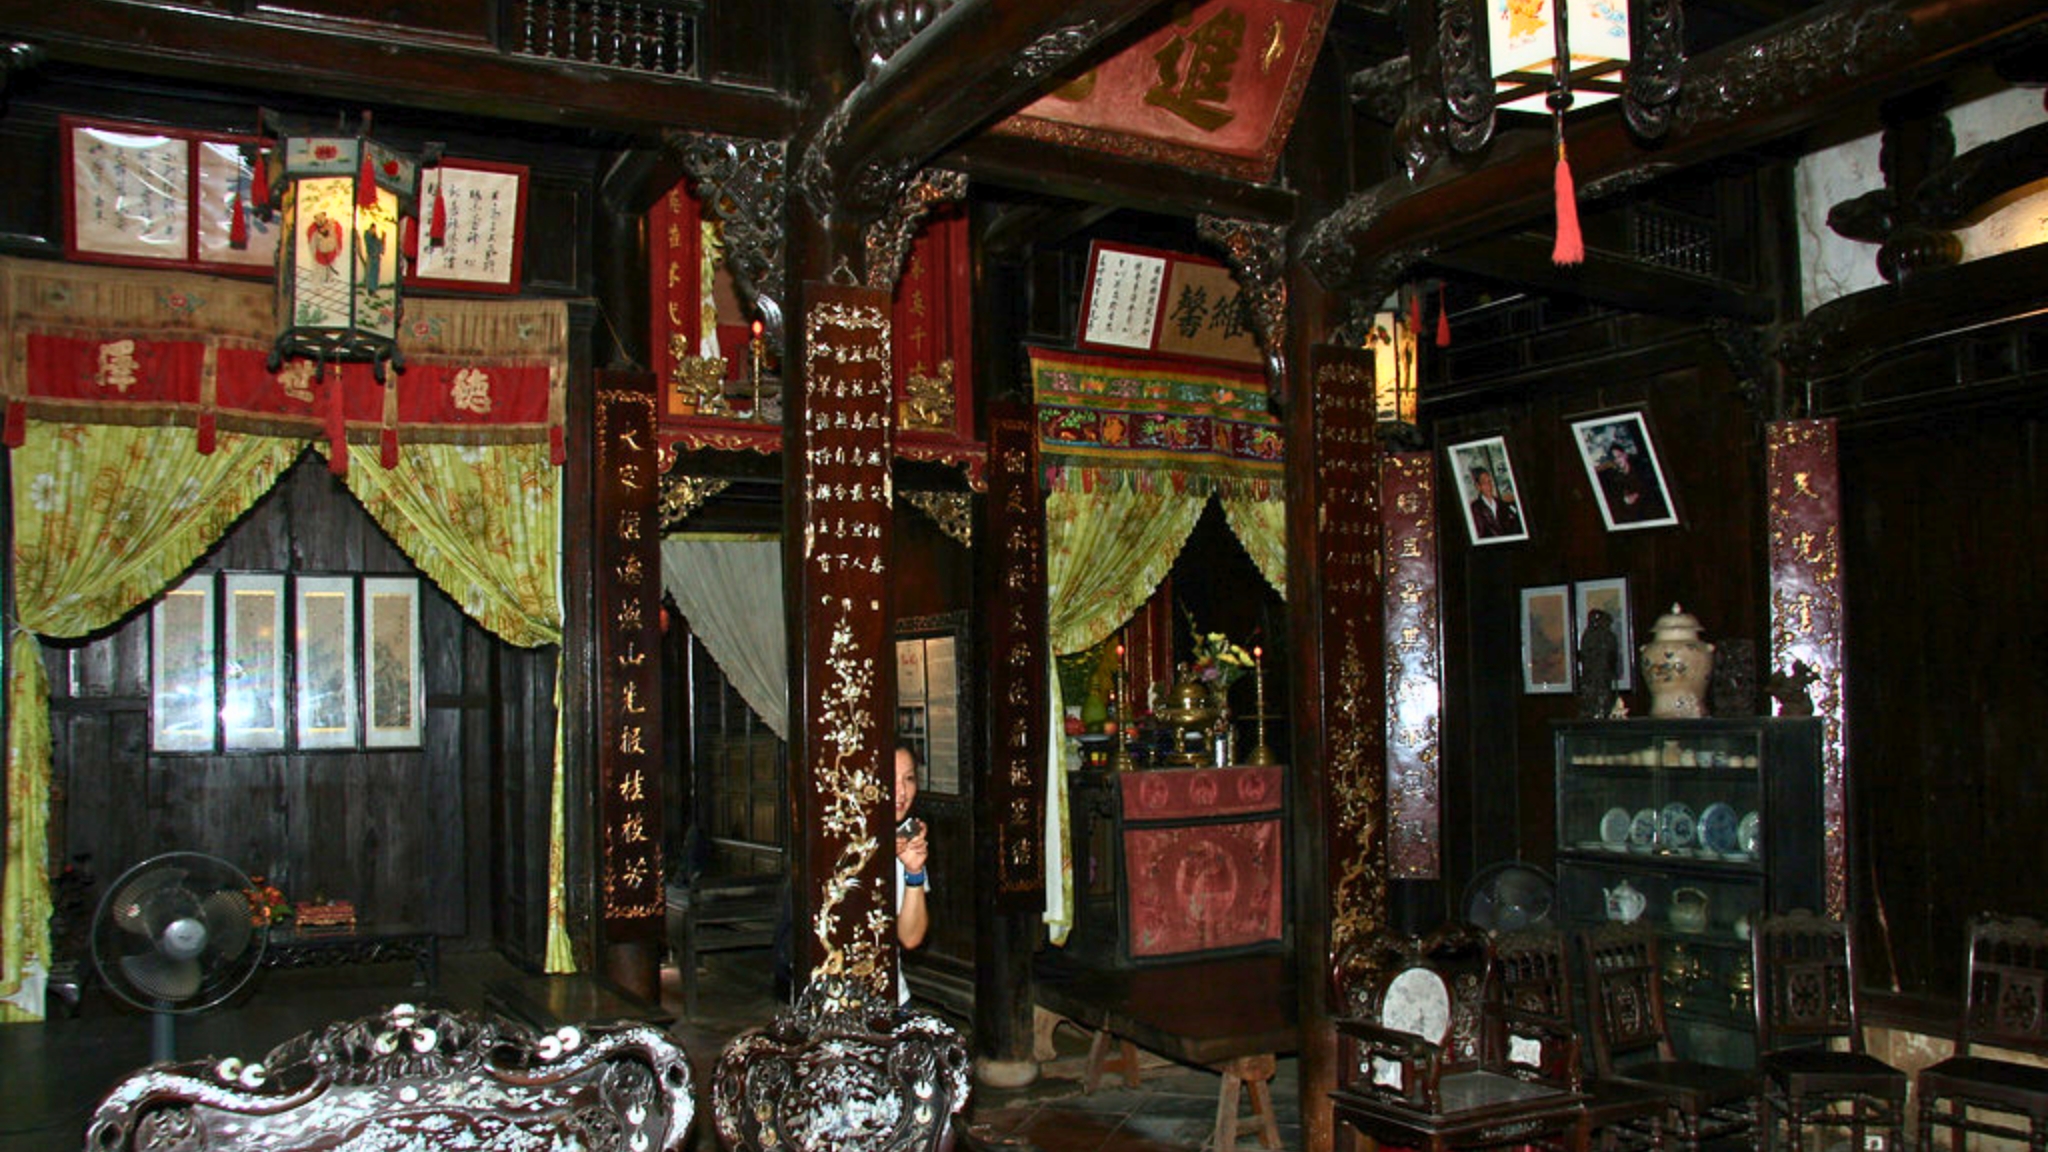 Tan Ky Old House Is A Well Preserved 18th Century Merchant’s House (Cre Flickr)